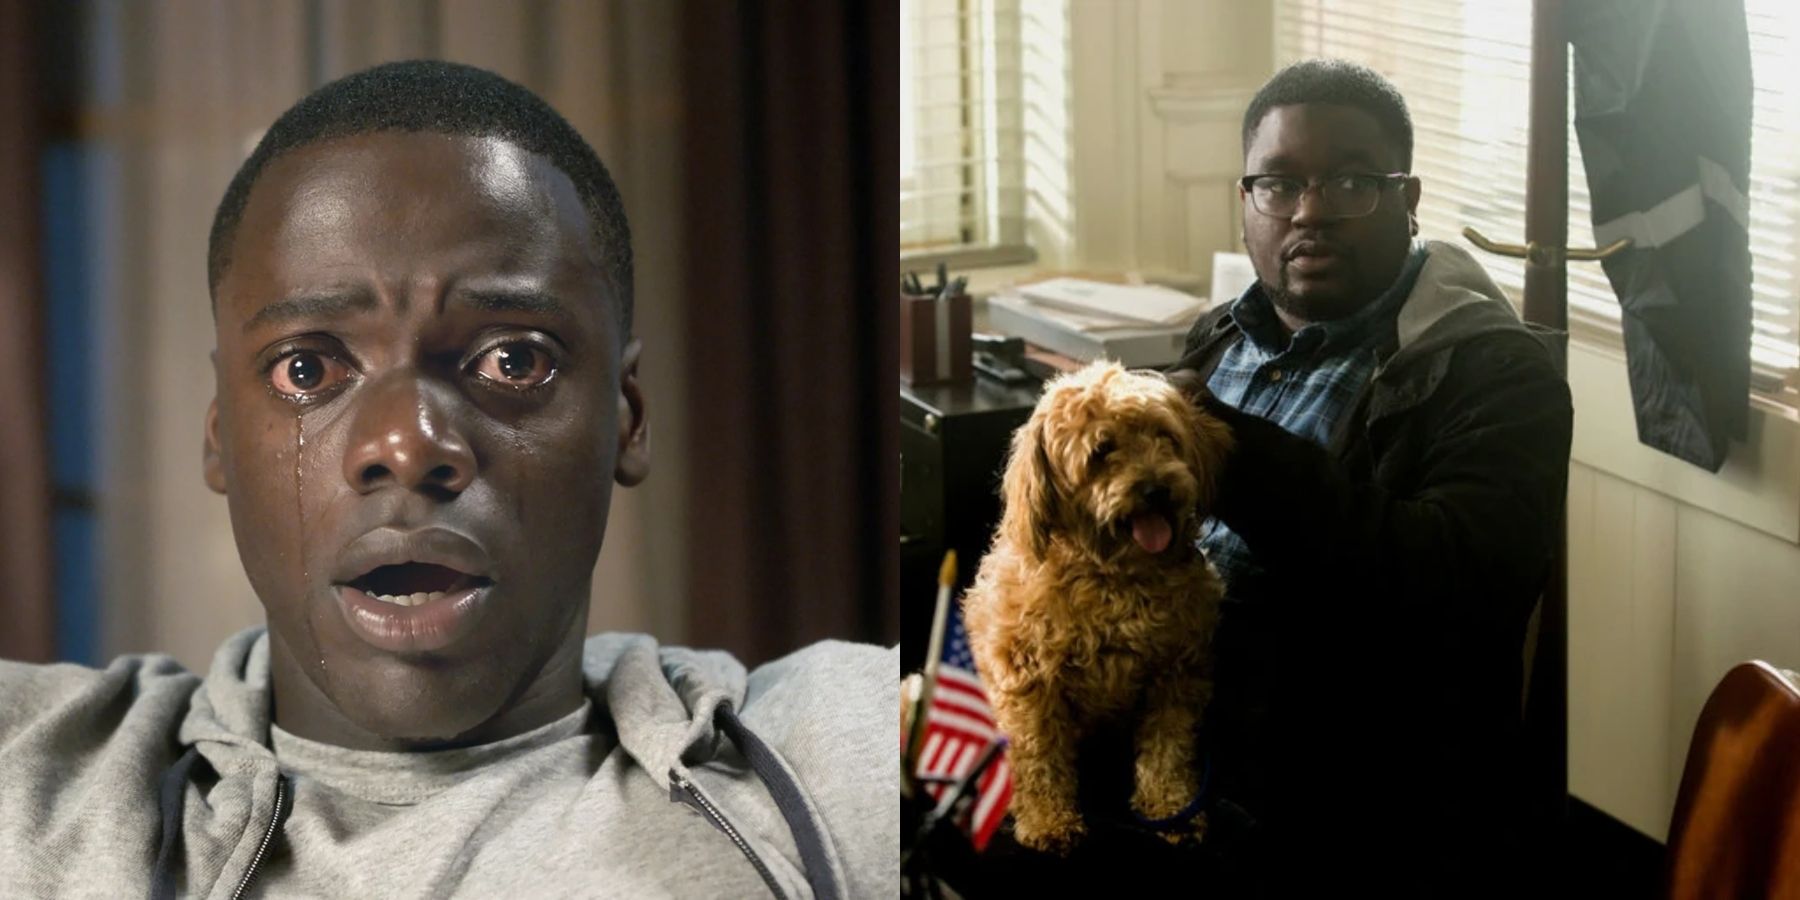 Chris Washington (Daniel Kaluuya) and Rod Williams (Lil Rel Howery) in Get Out